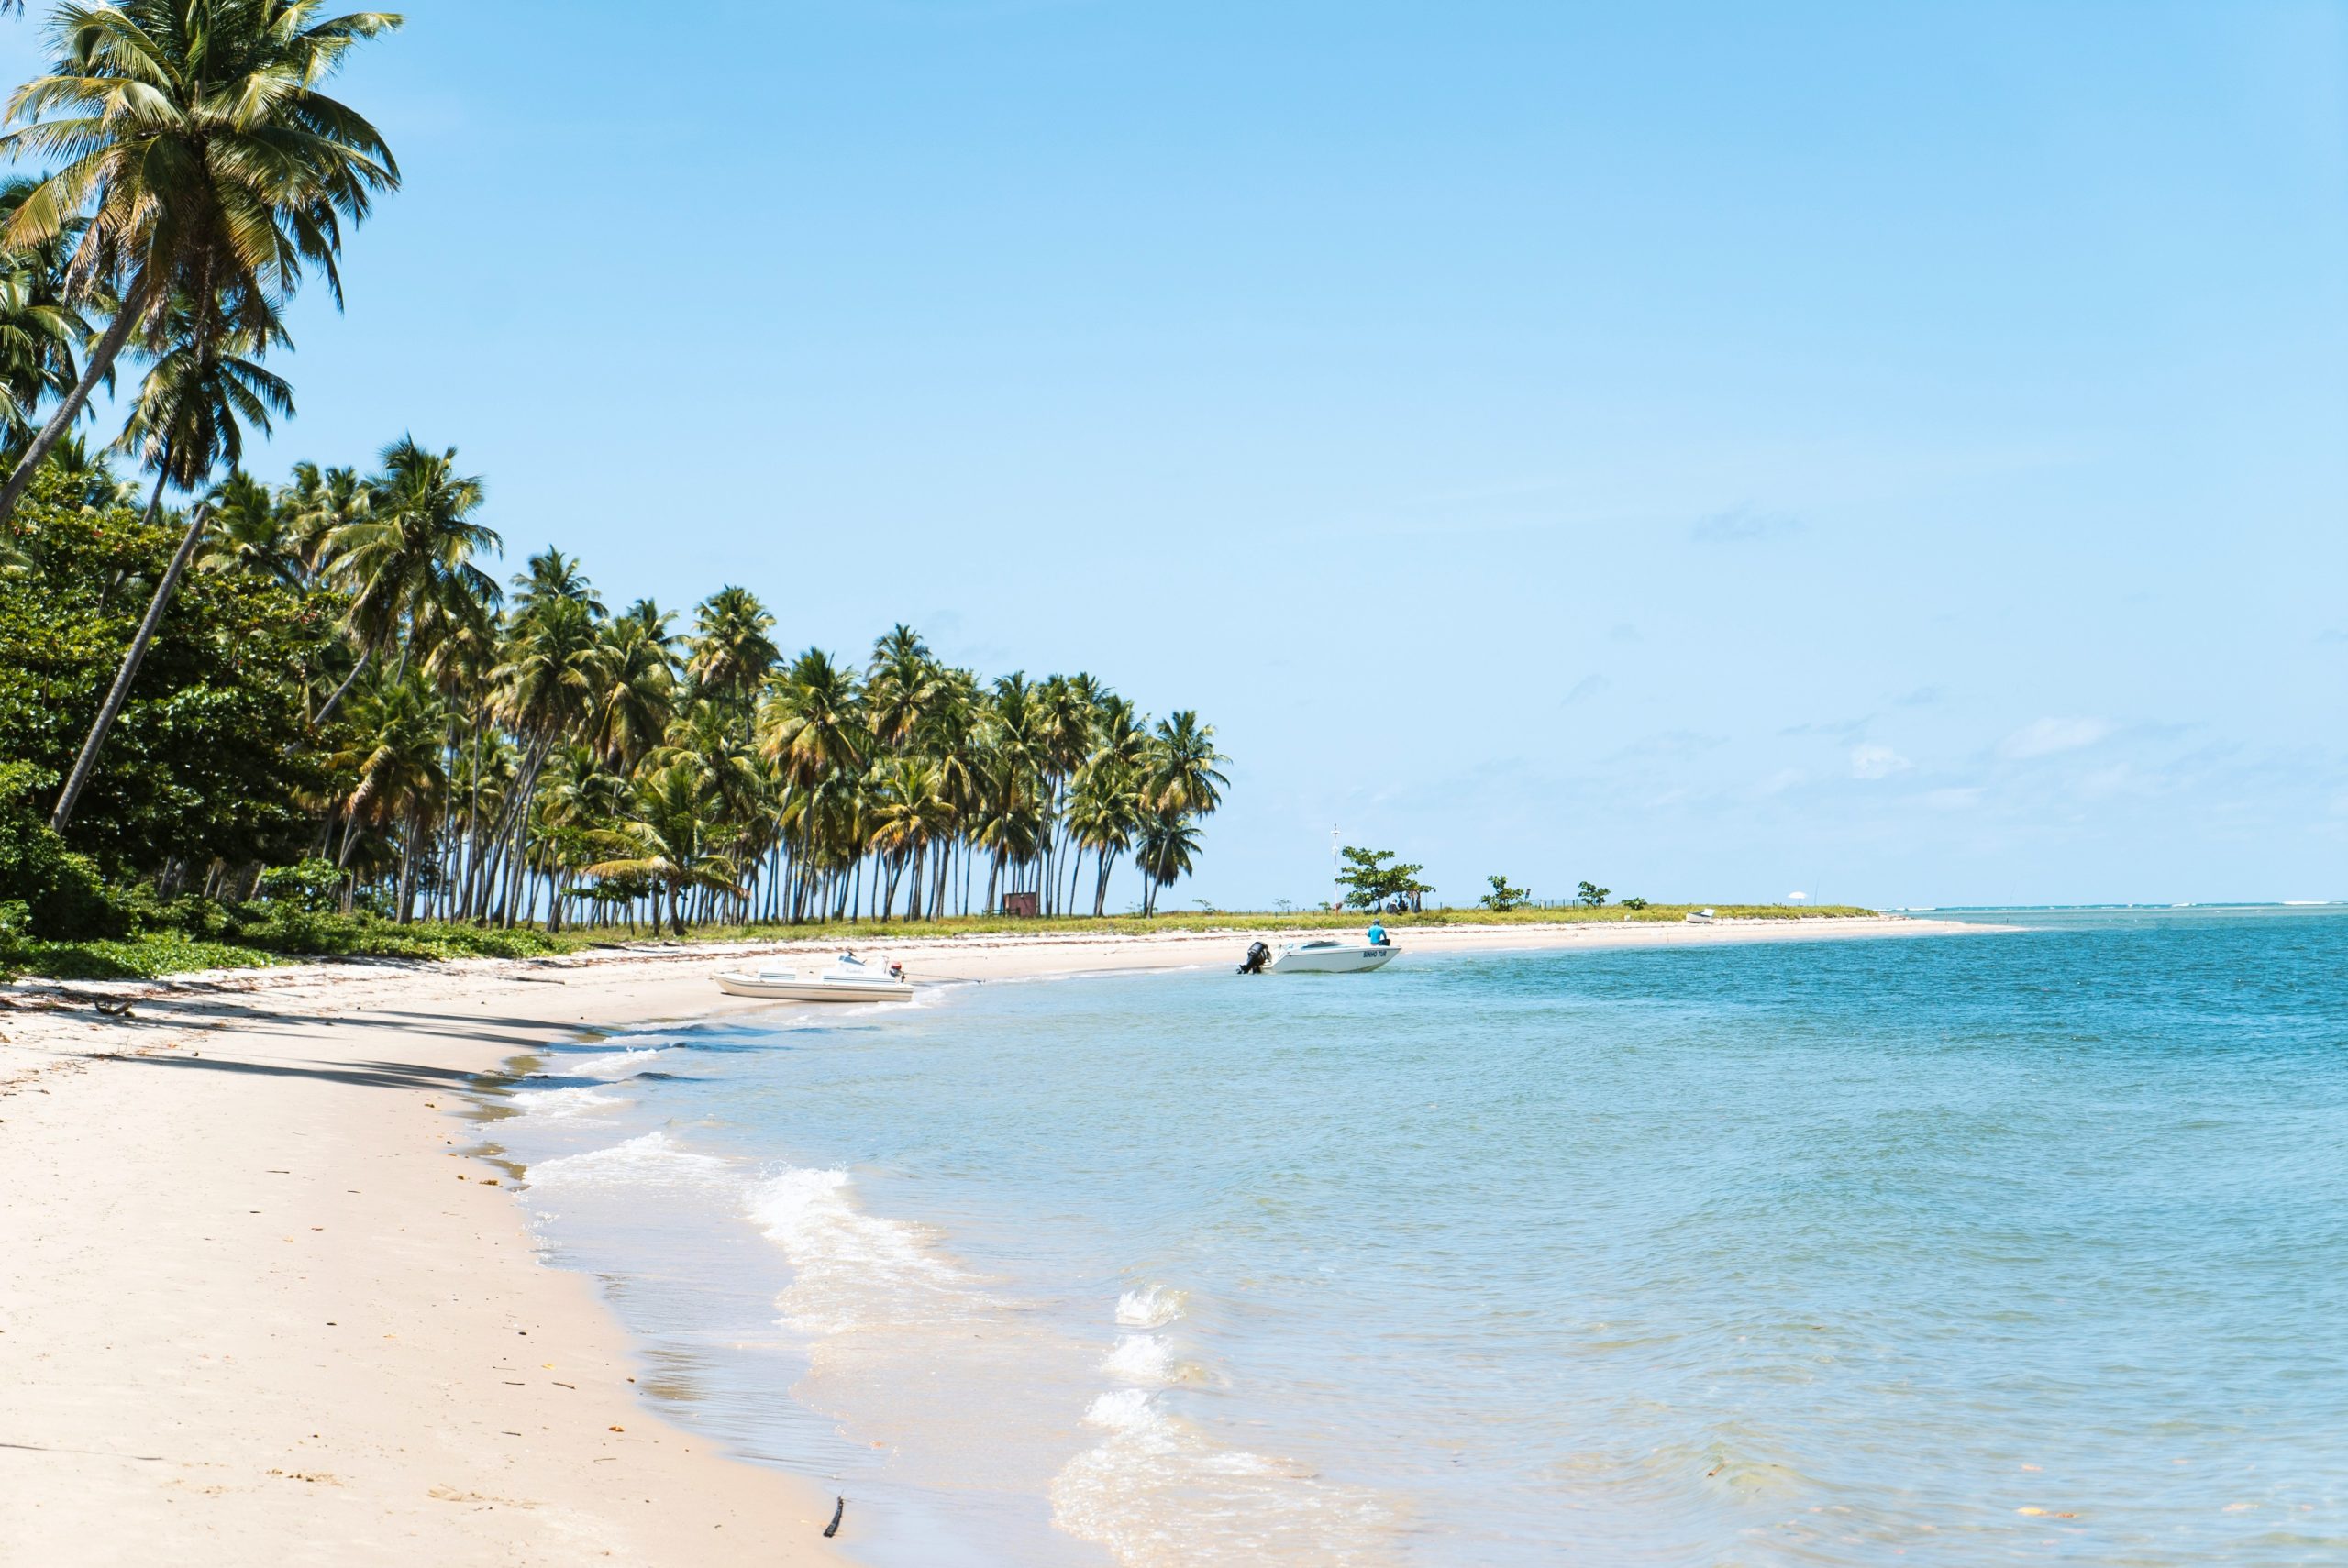 discover the perfect tropical getaways for your next vacation. explore stunning beaches, lush rainforests, and vibrant cultures in these idyllic destinations.